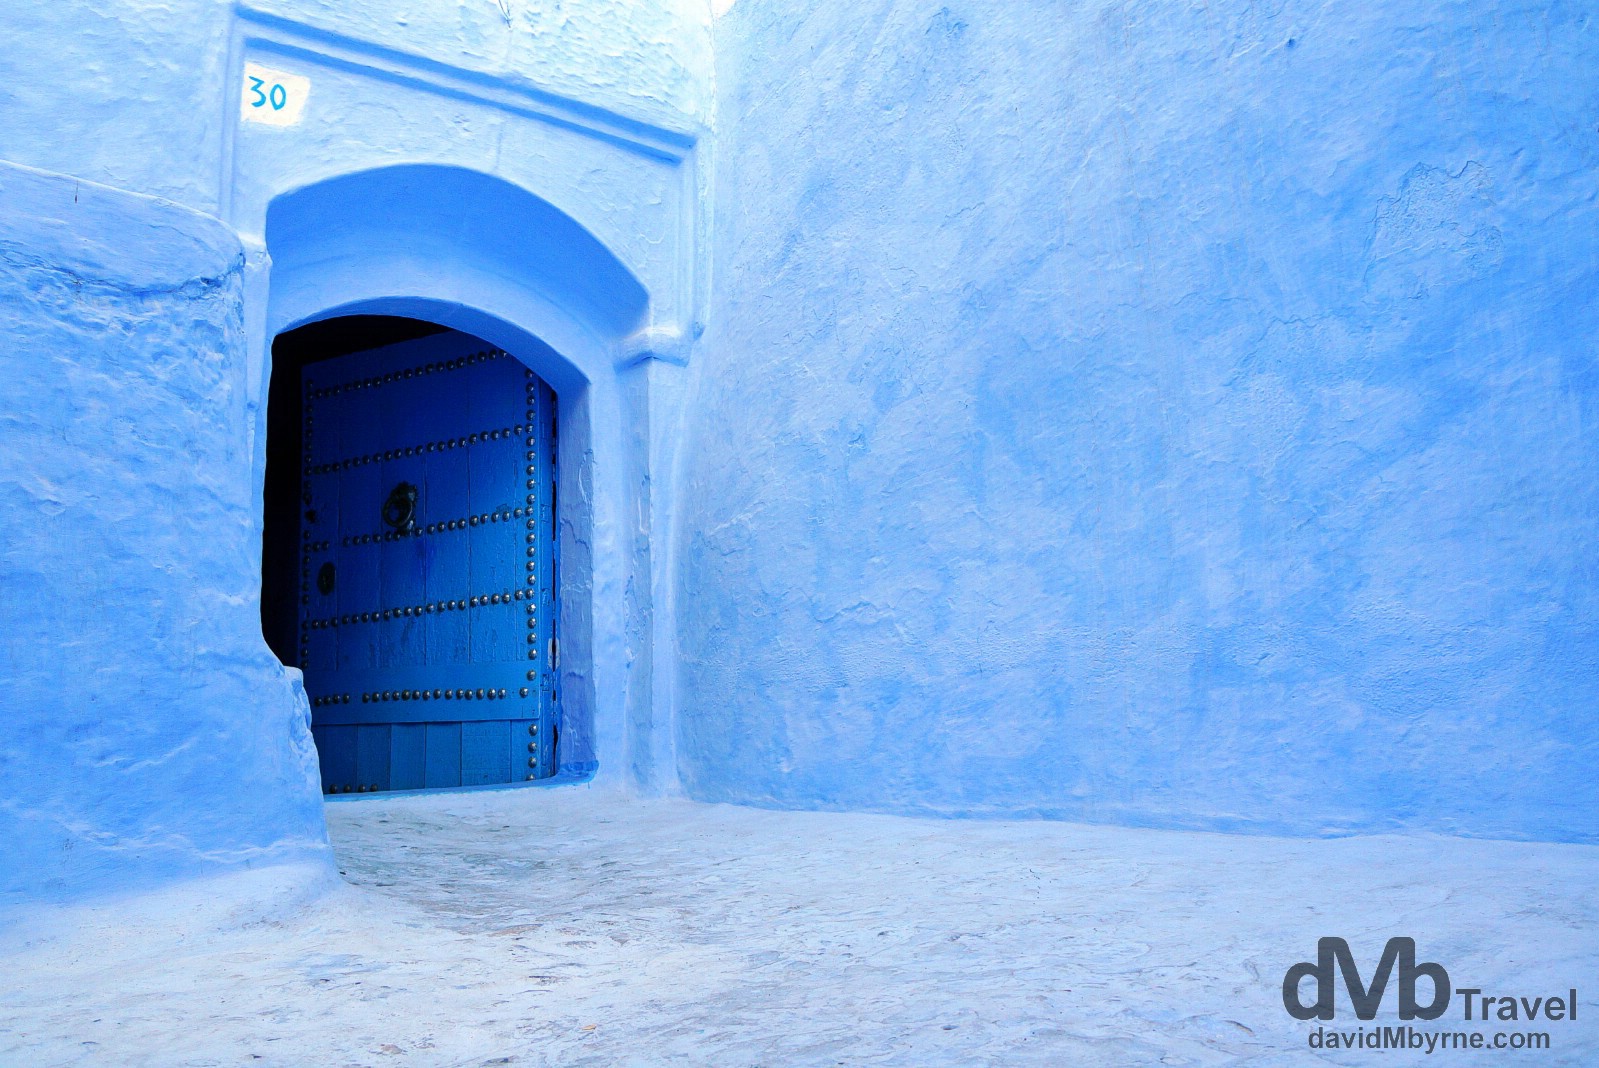 Feeling blue in the lanes of the medina in Chefchaouen, Morocco. May 31st, 2014.